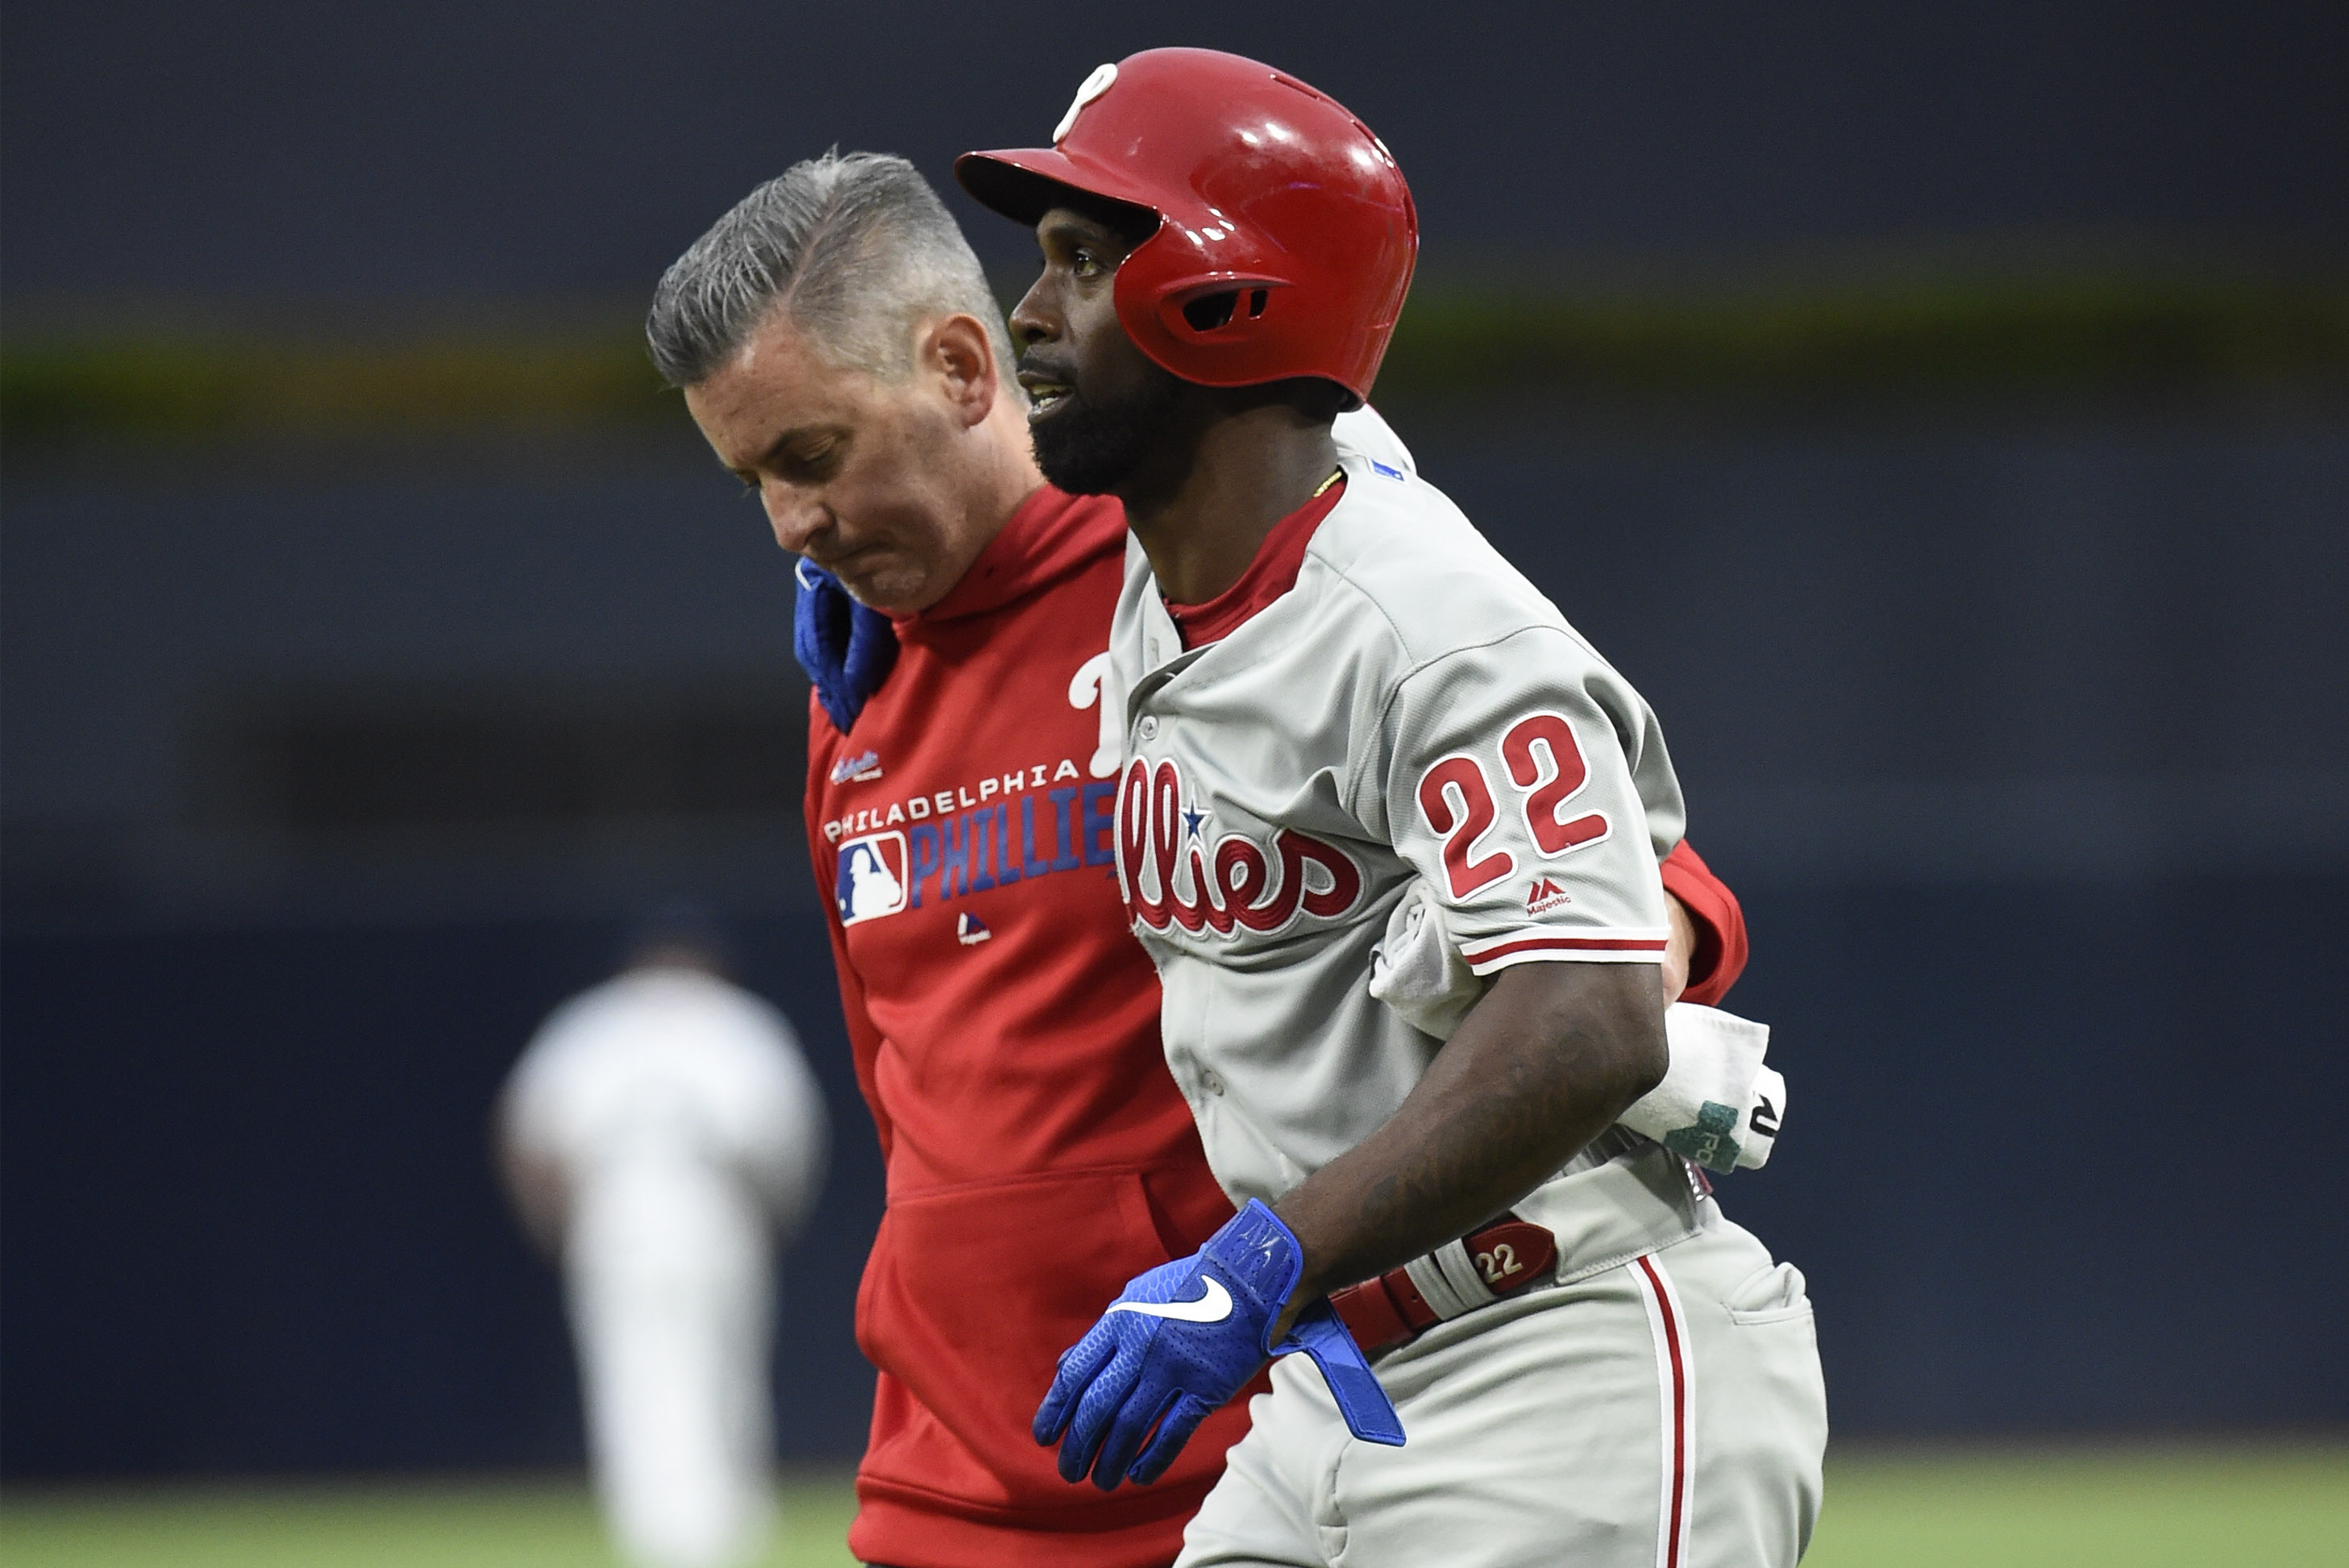 Phillies' Andrew McCutchen's Knee Injury Diagnosed as Torn ACL